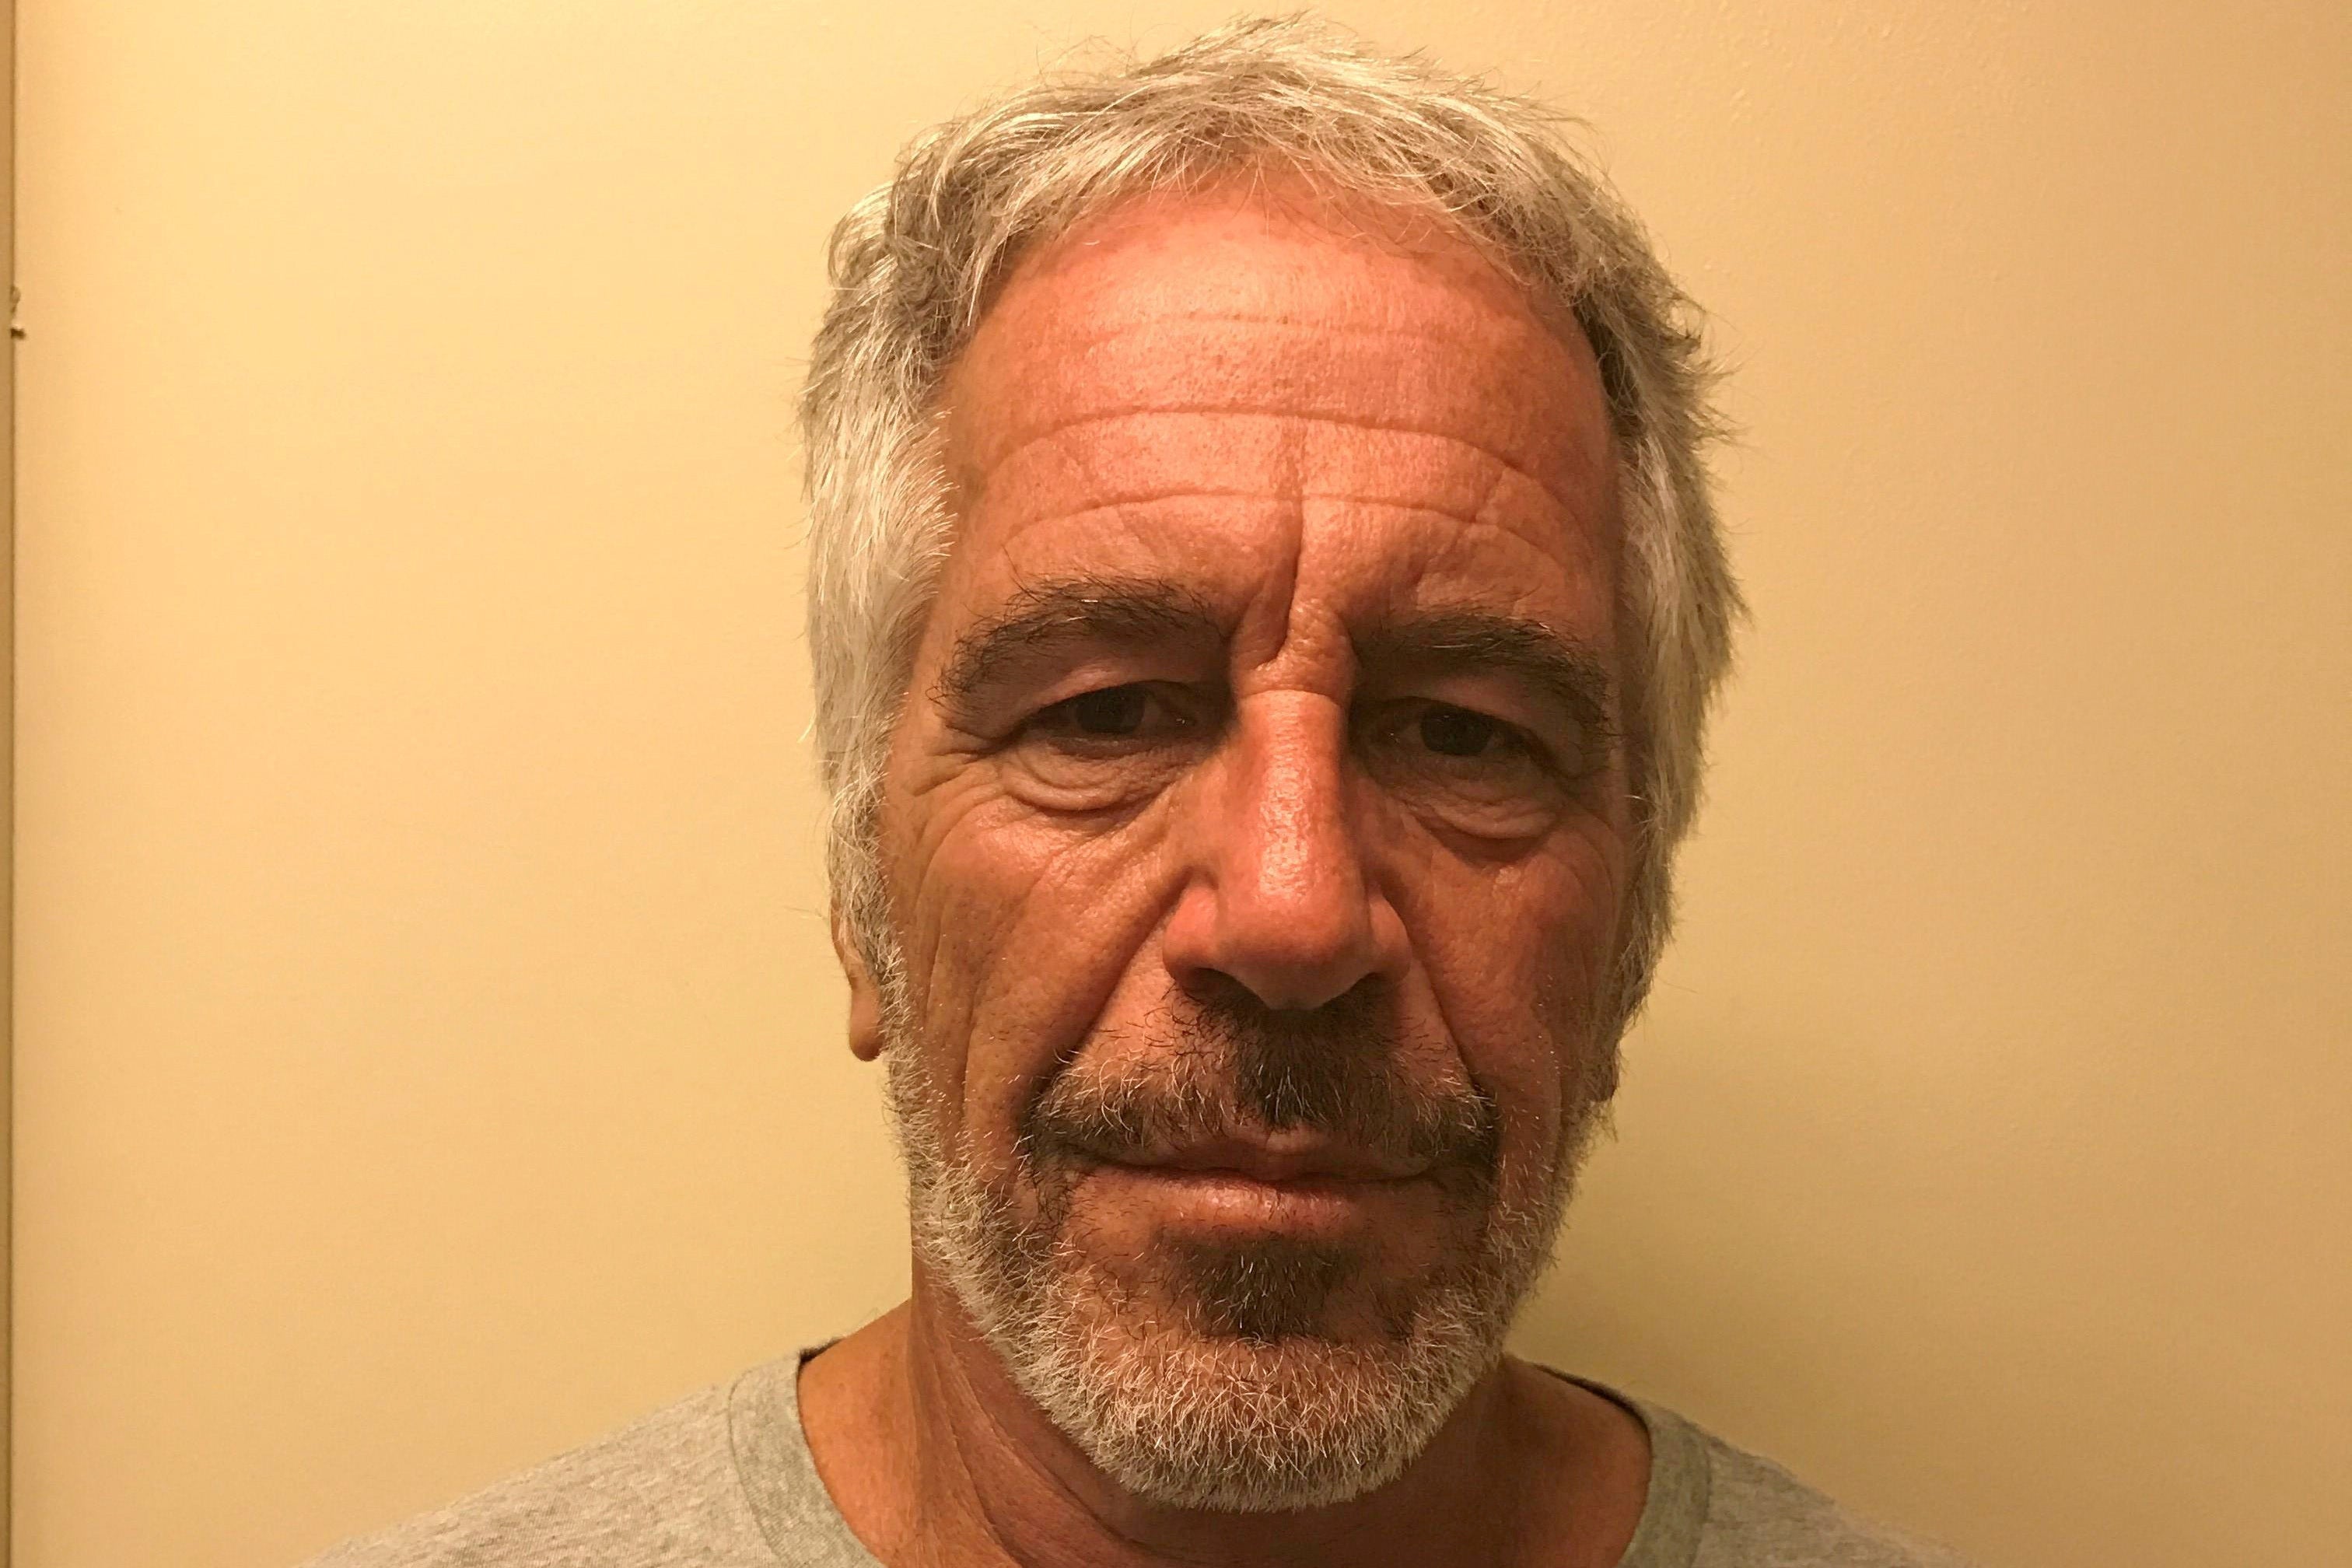 Documents containing the names of 170 of Jeffrey Epstein’s associates are being made public